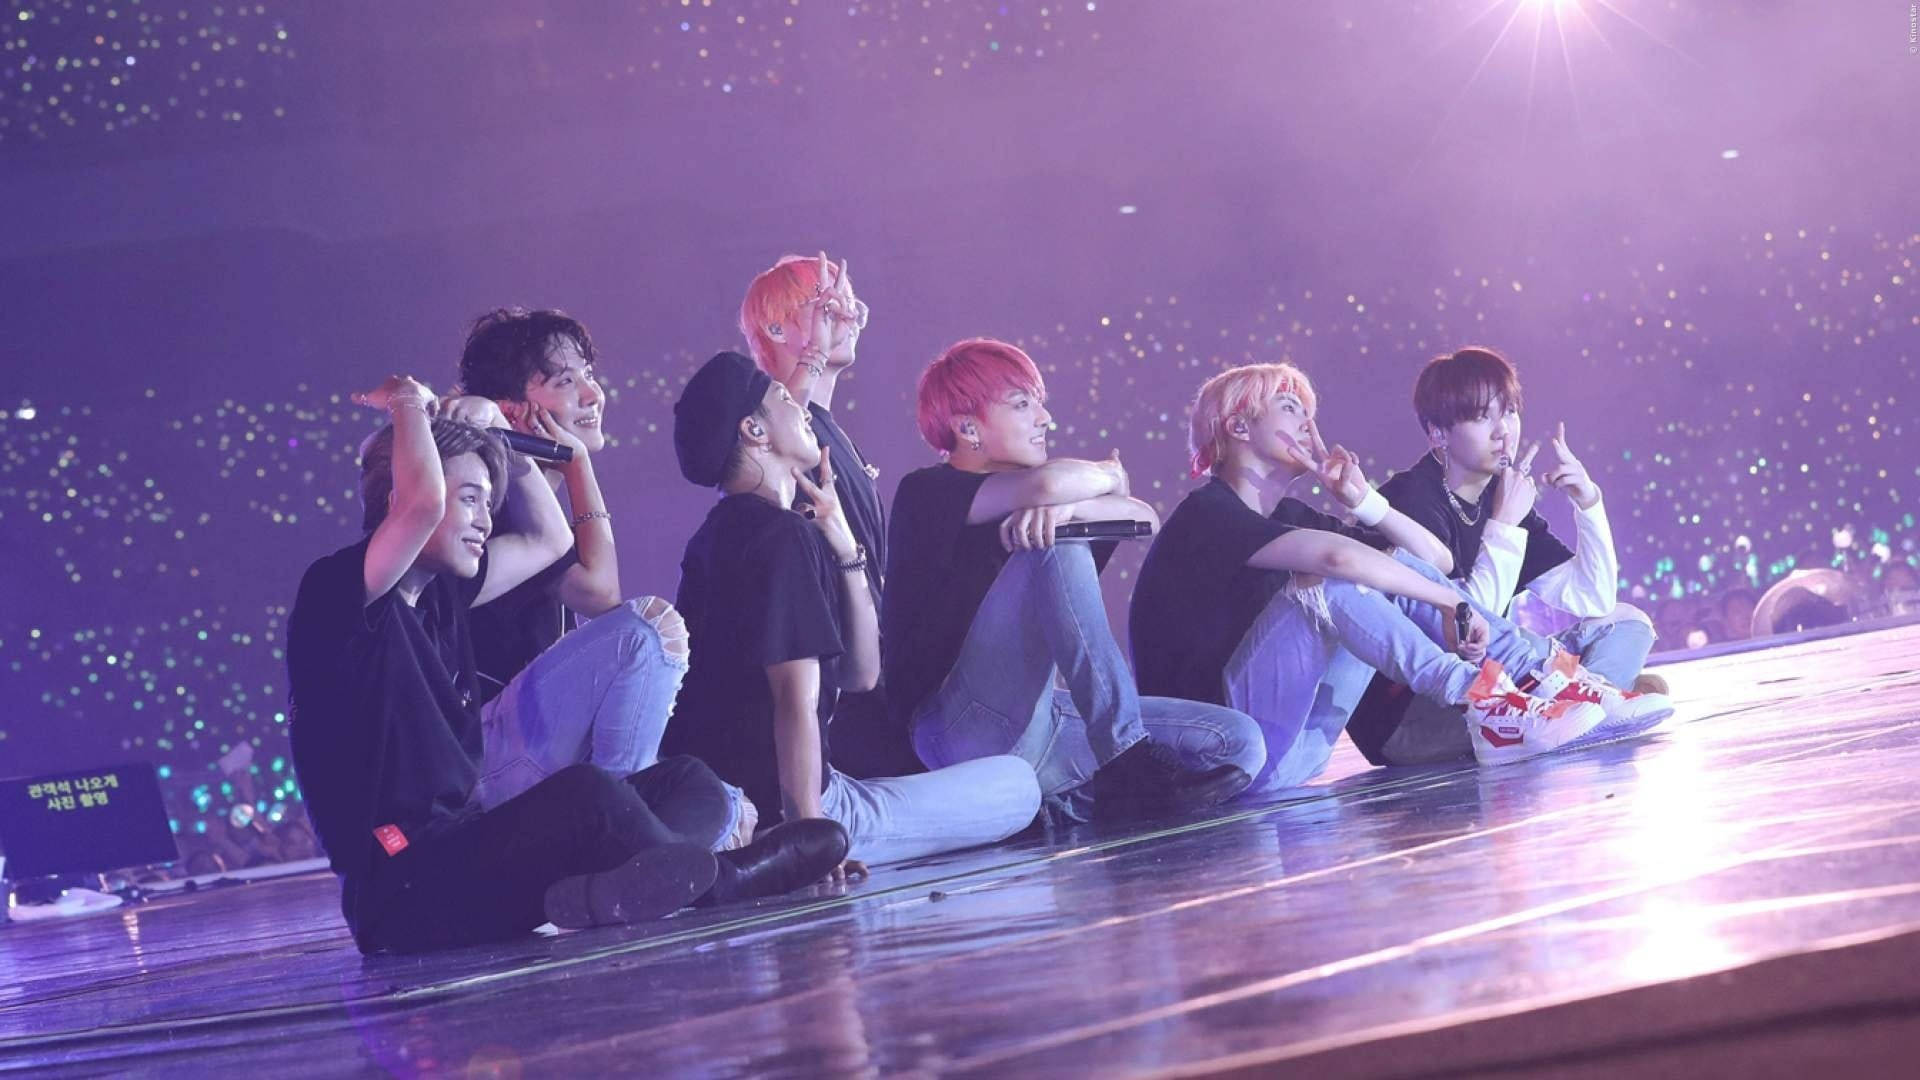 Top 999 Bts Purple Aesthetic Wallpaper Full HD 4K Free To Use